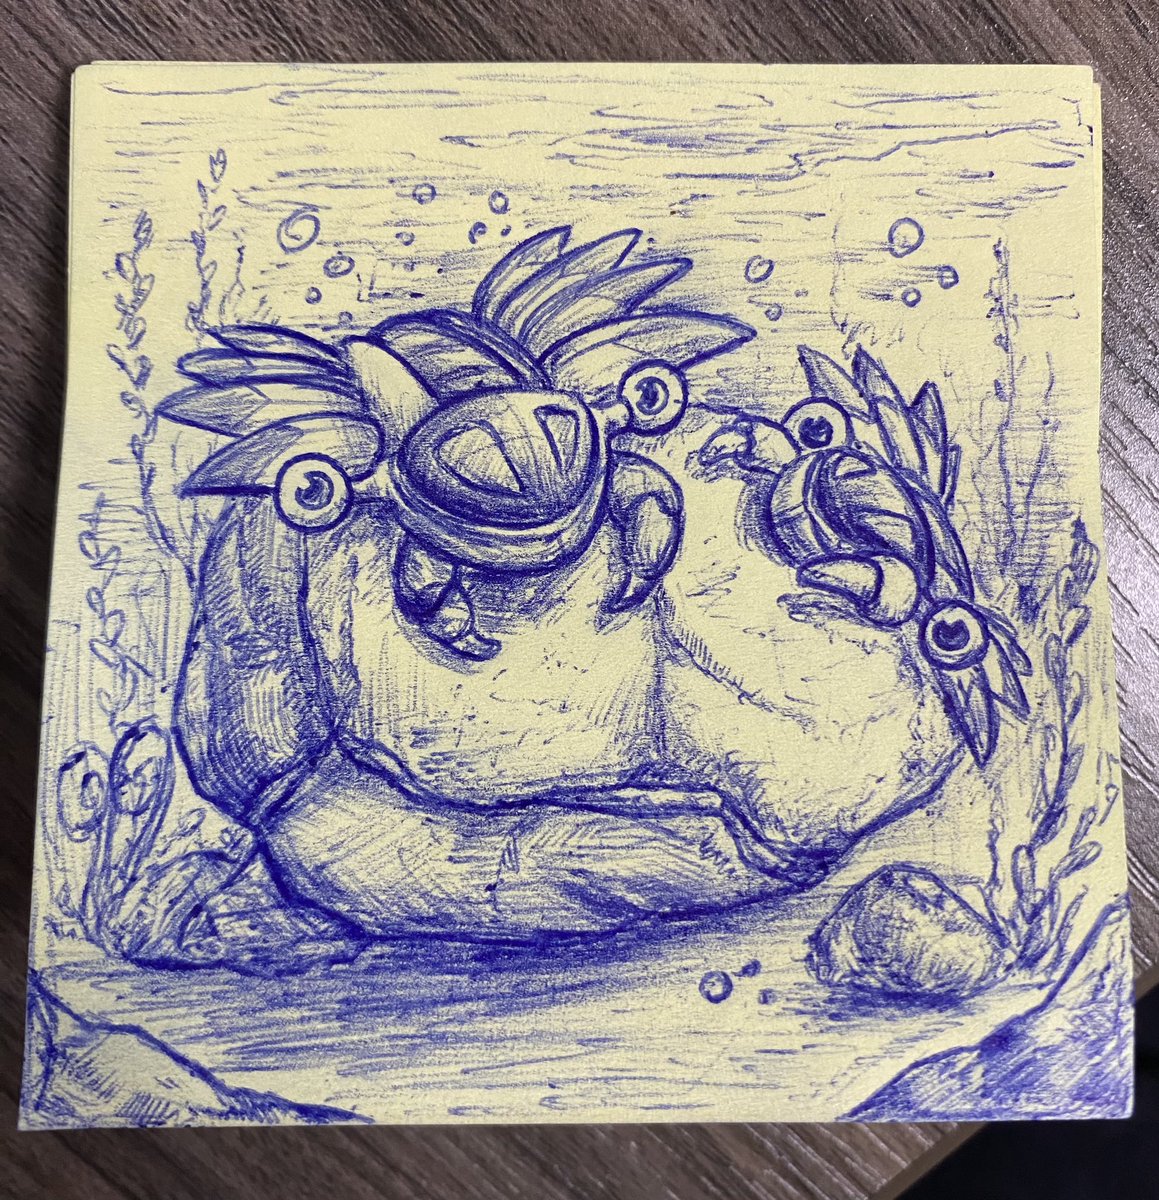 Lil Fellas of the Day 158
Couple a’ deep sea dudes hangin’ on a rock, simple as

Anorith